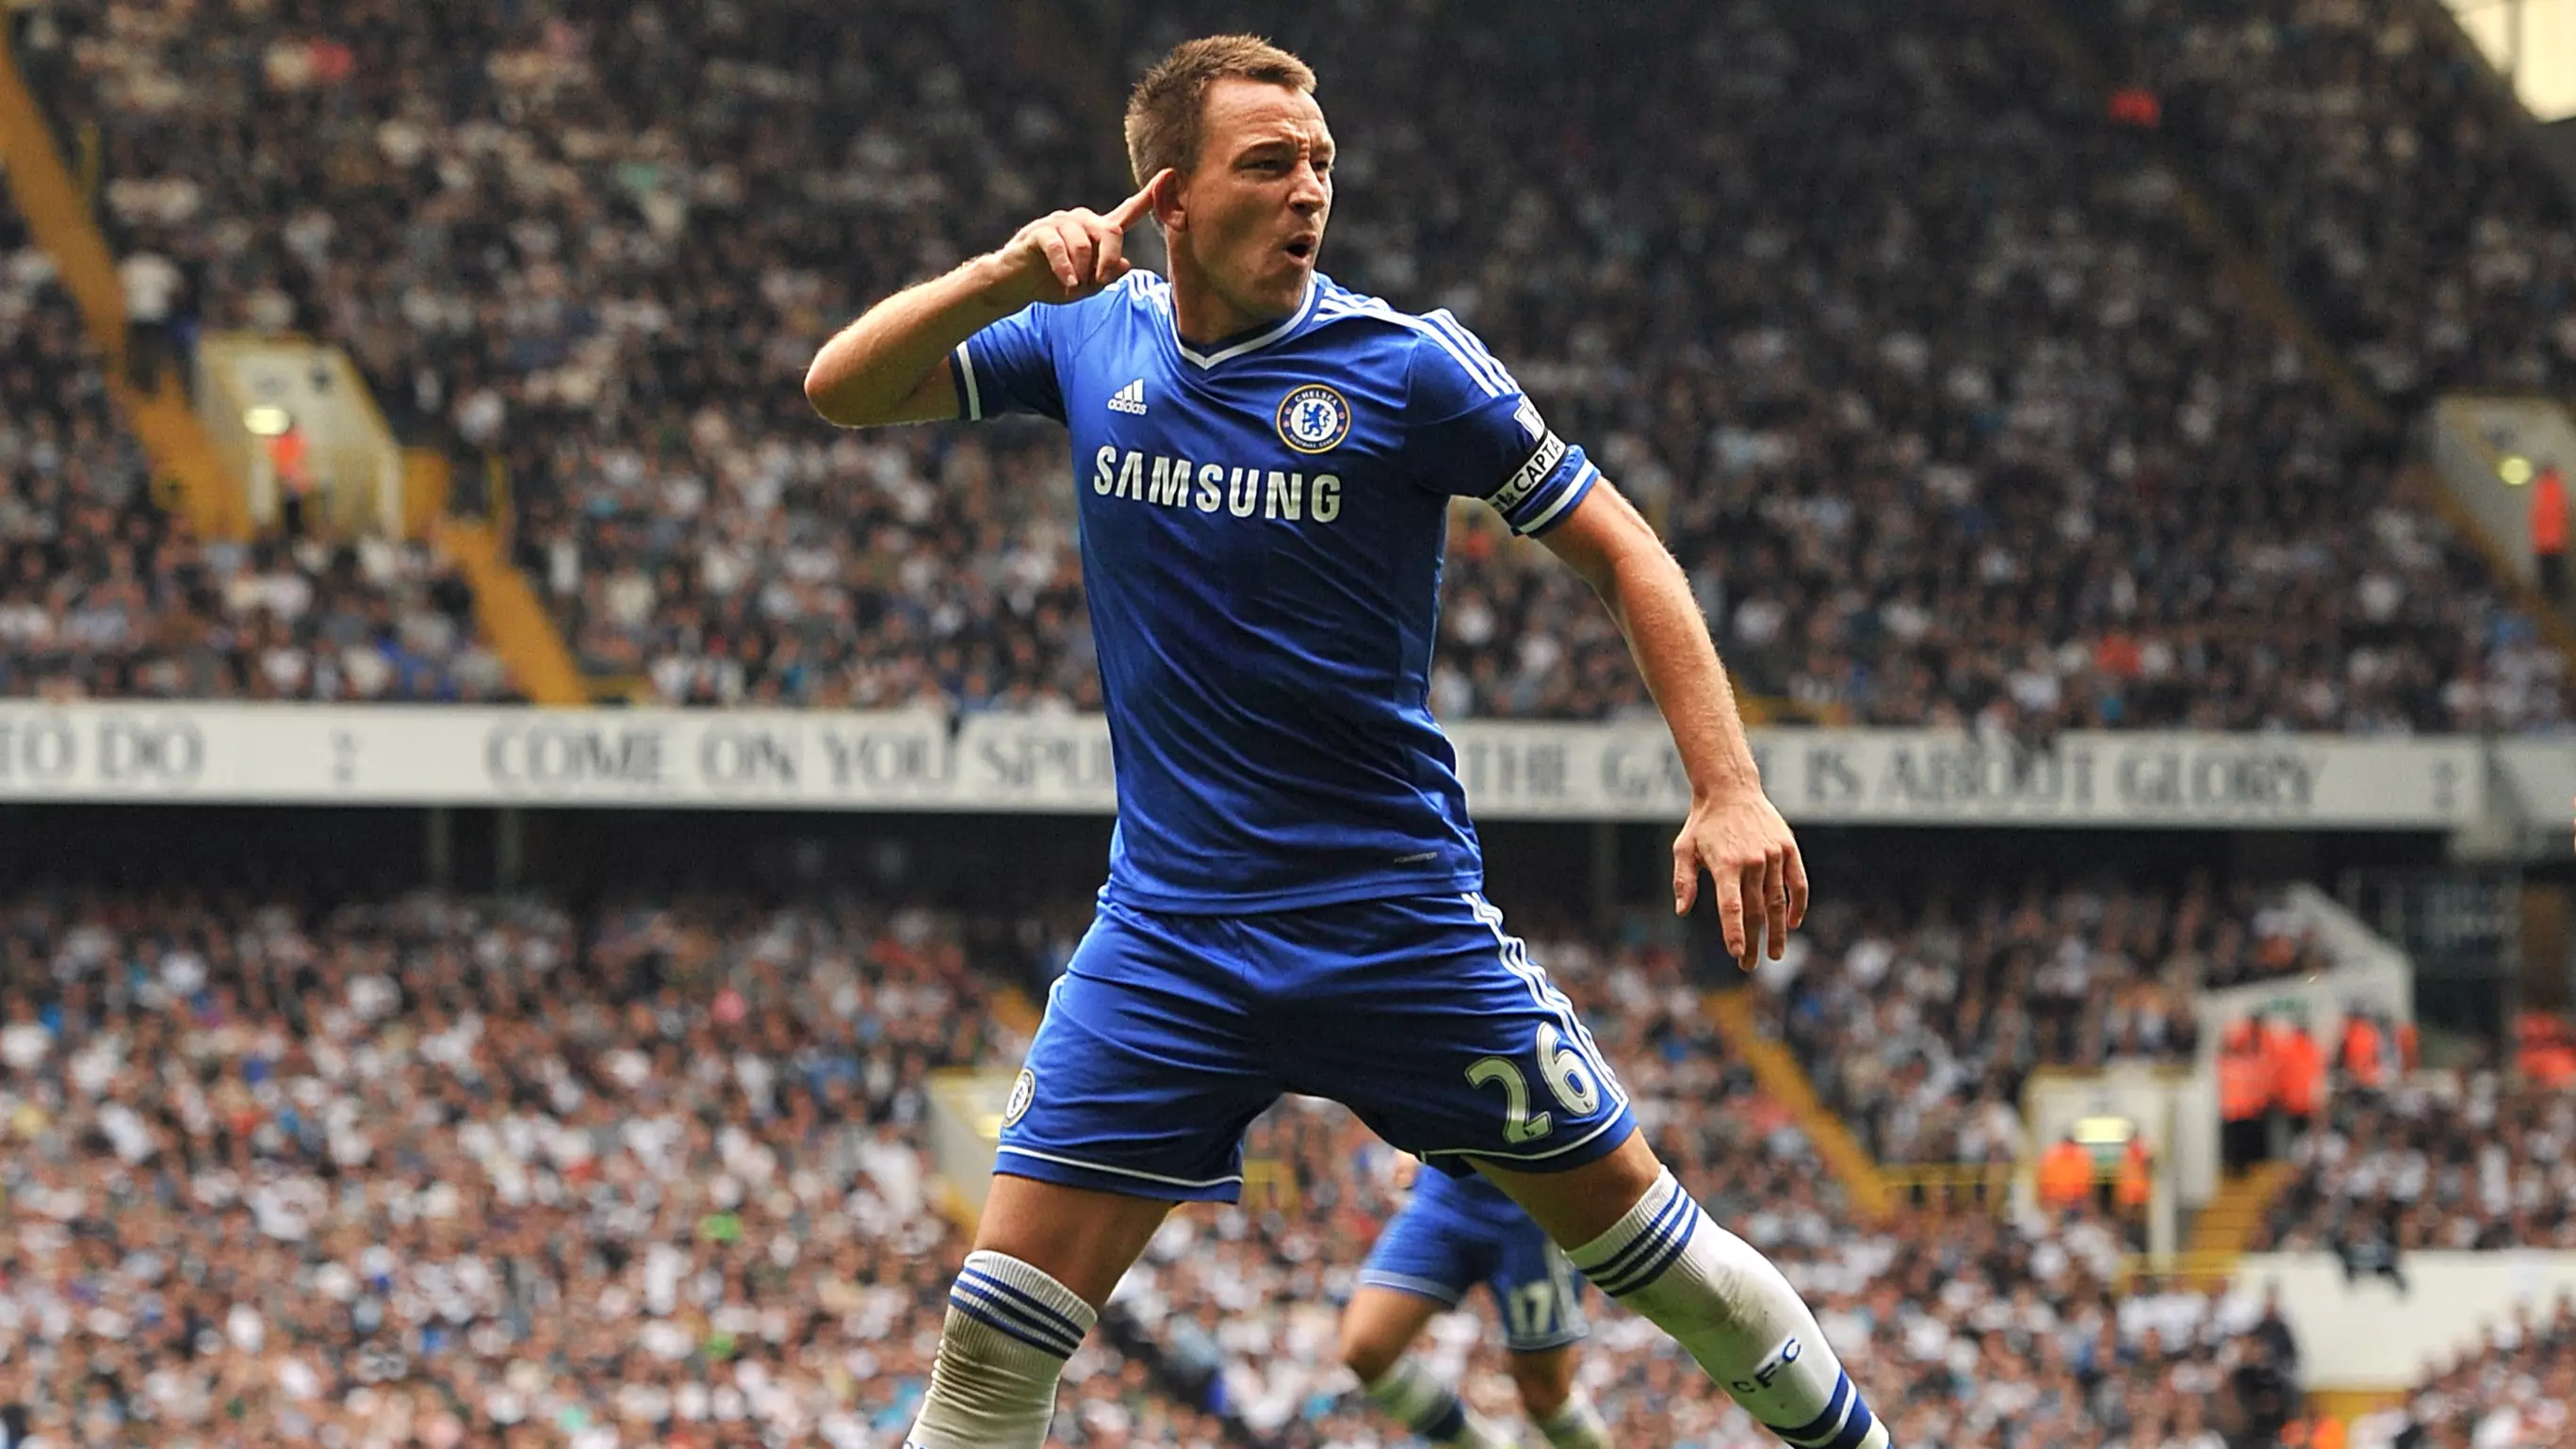 Is John Terry The Best Centre Back In Premier League History?